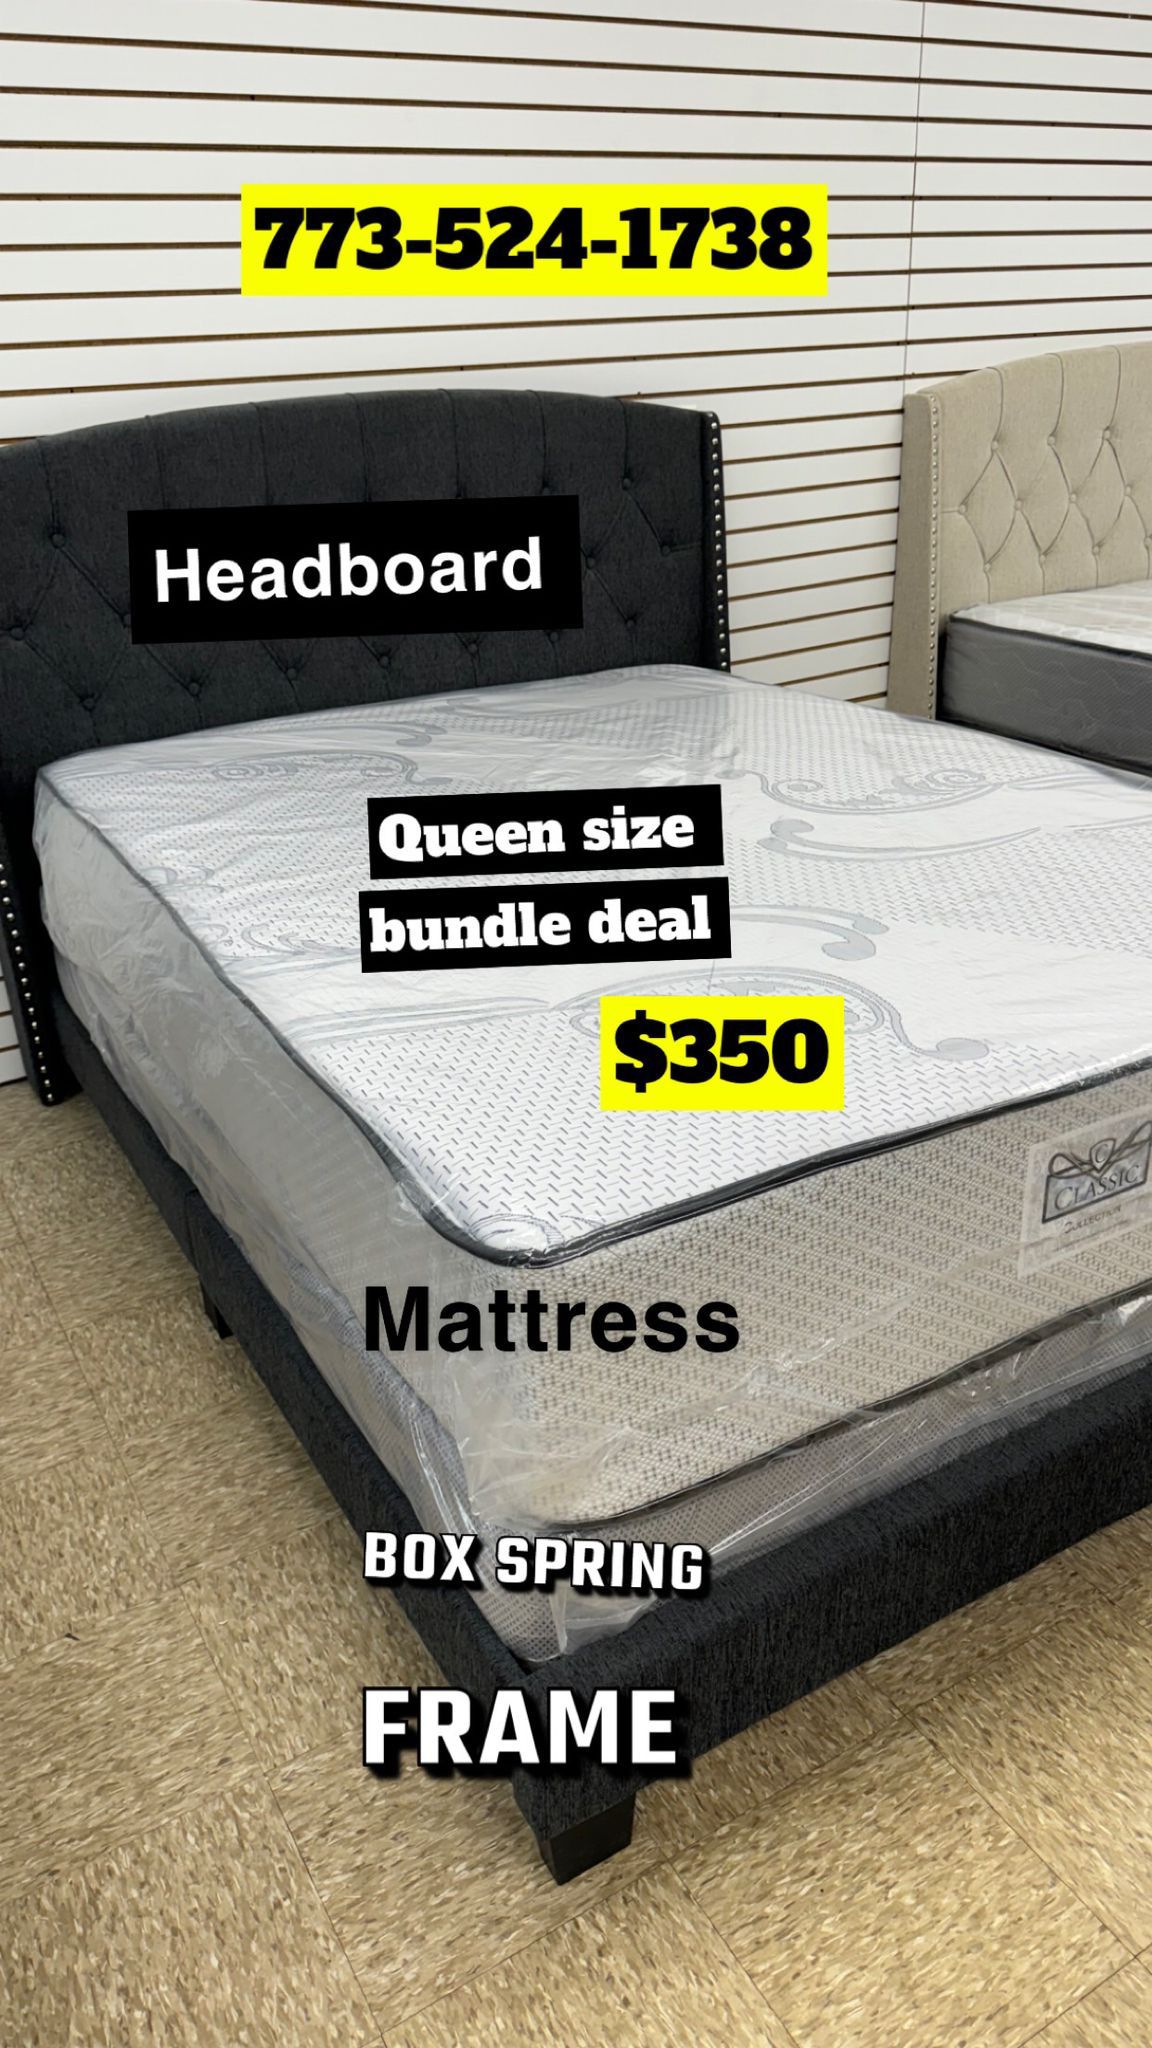 Queen Size Bundle Deal Headboard Frame Mattress And Box Spring $350 Only 